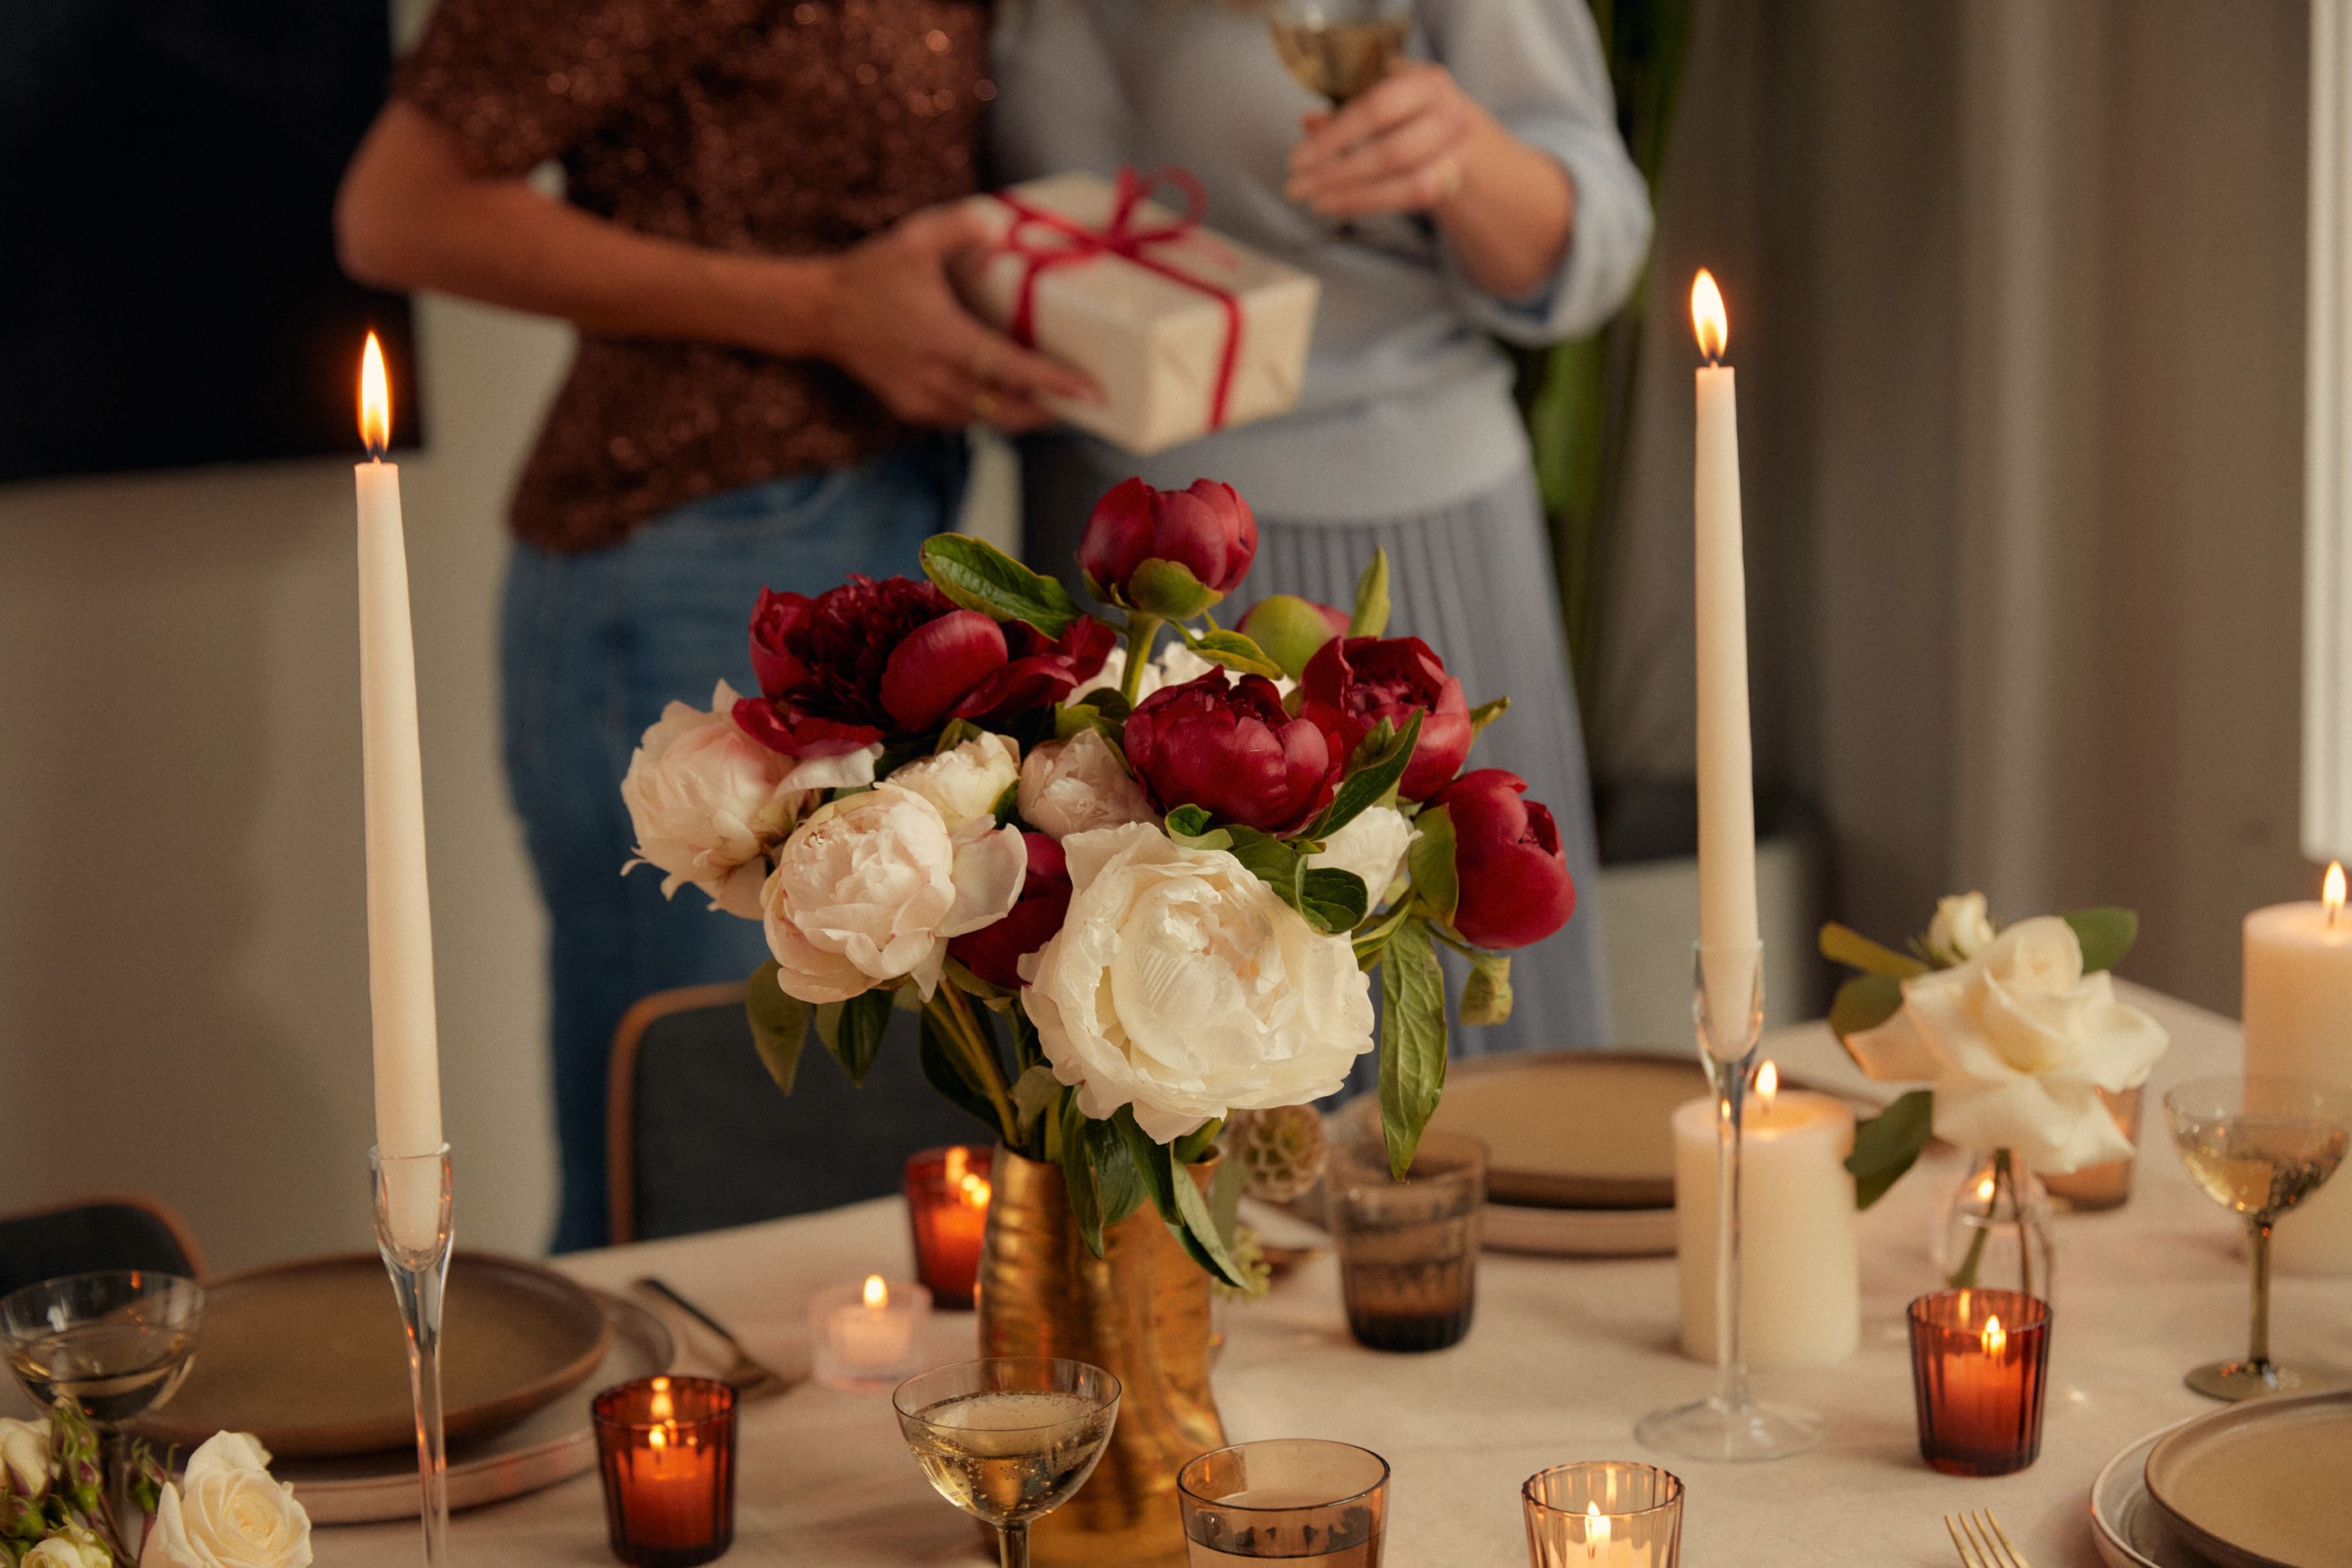 Holiday party hosts exchanging gifts and a close-up of UrbanStems bouquet, The Claus.